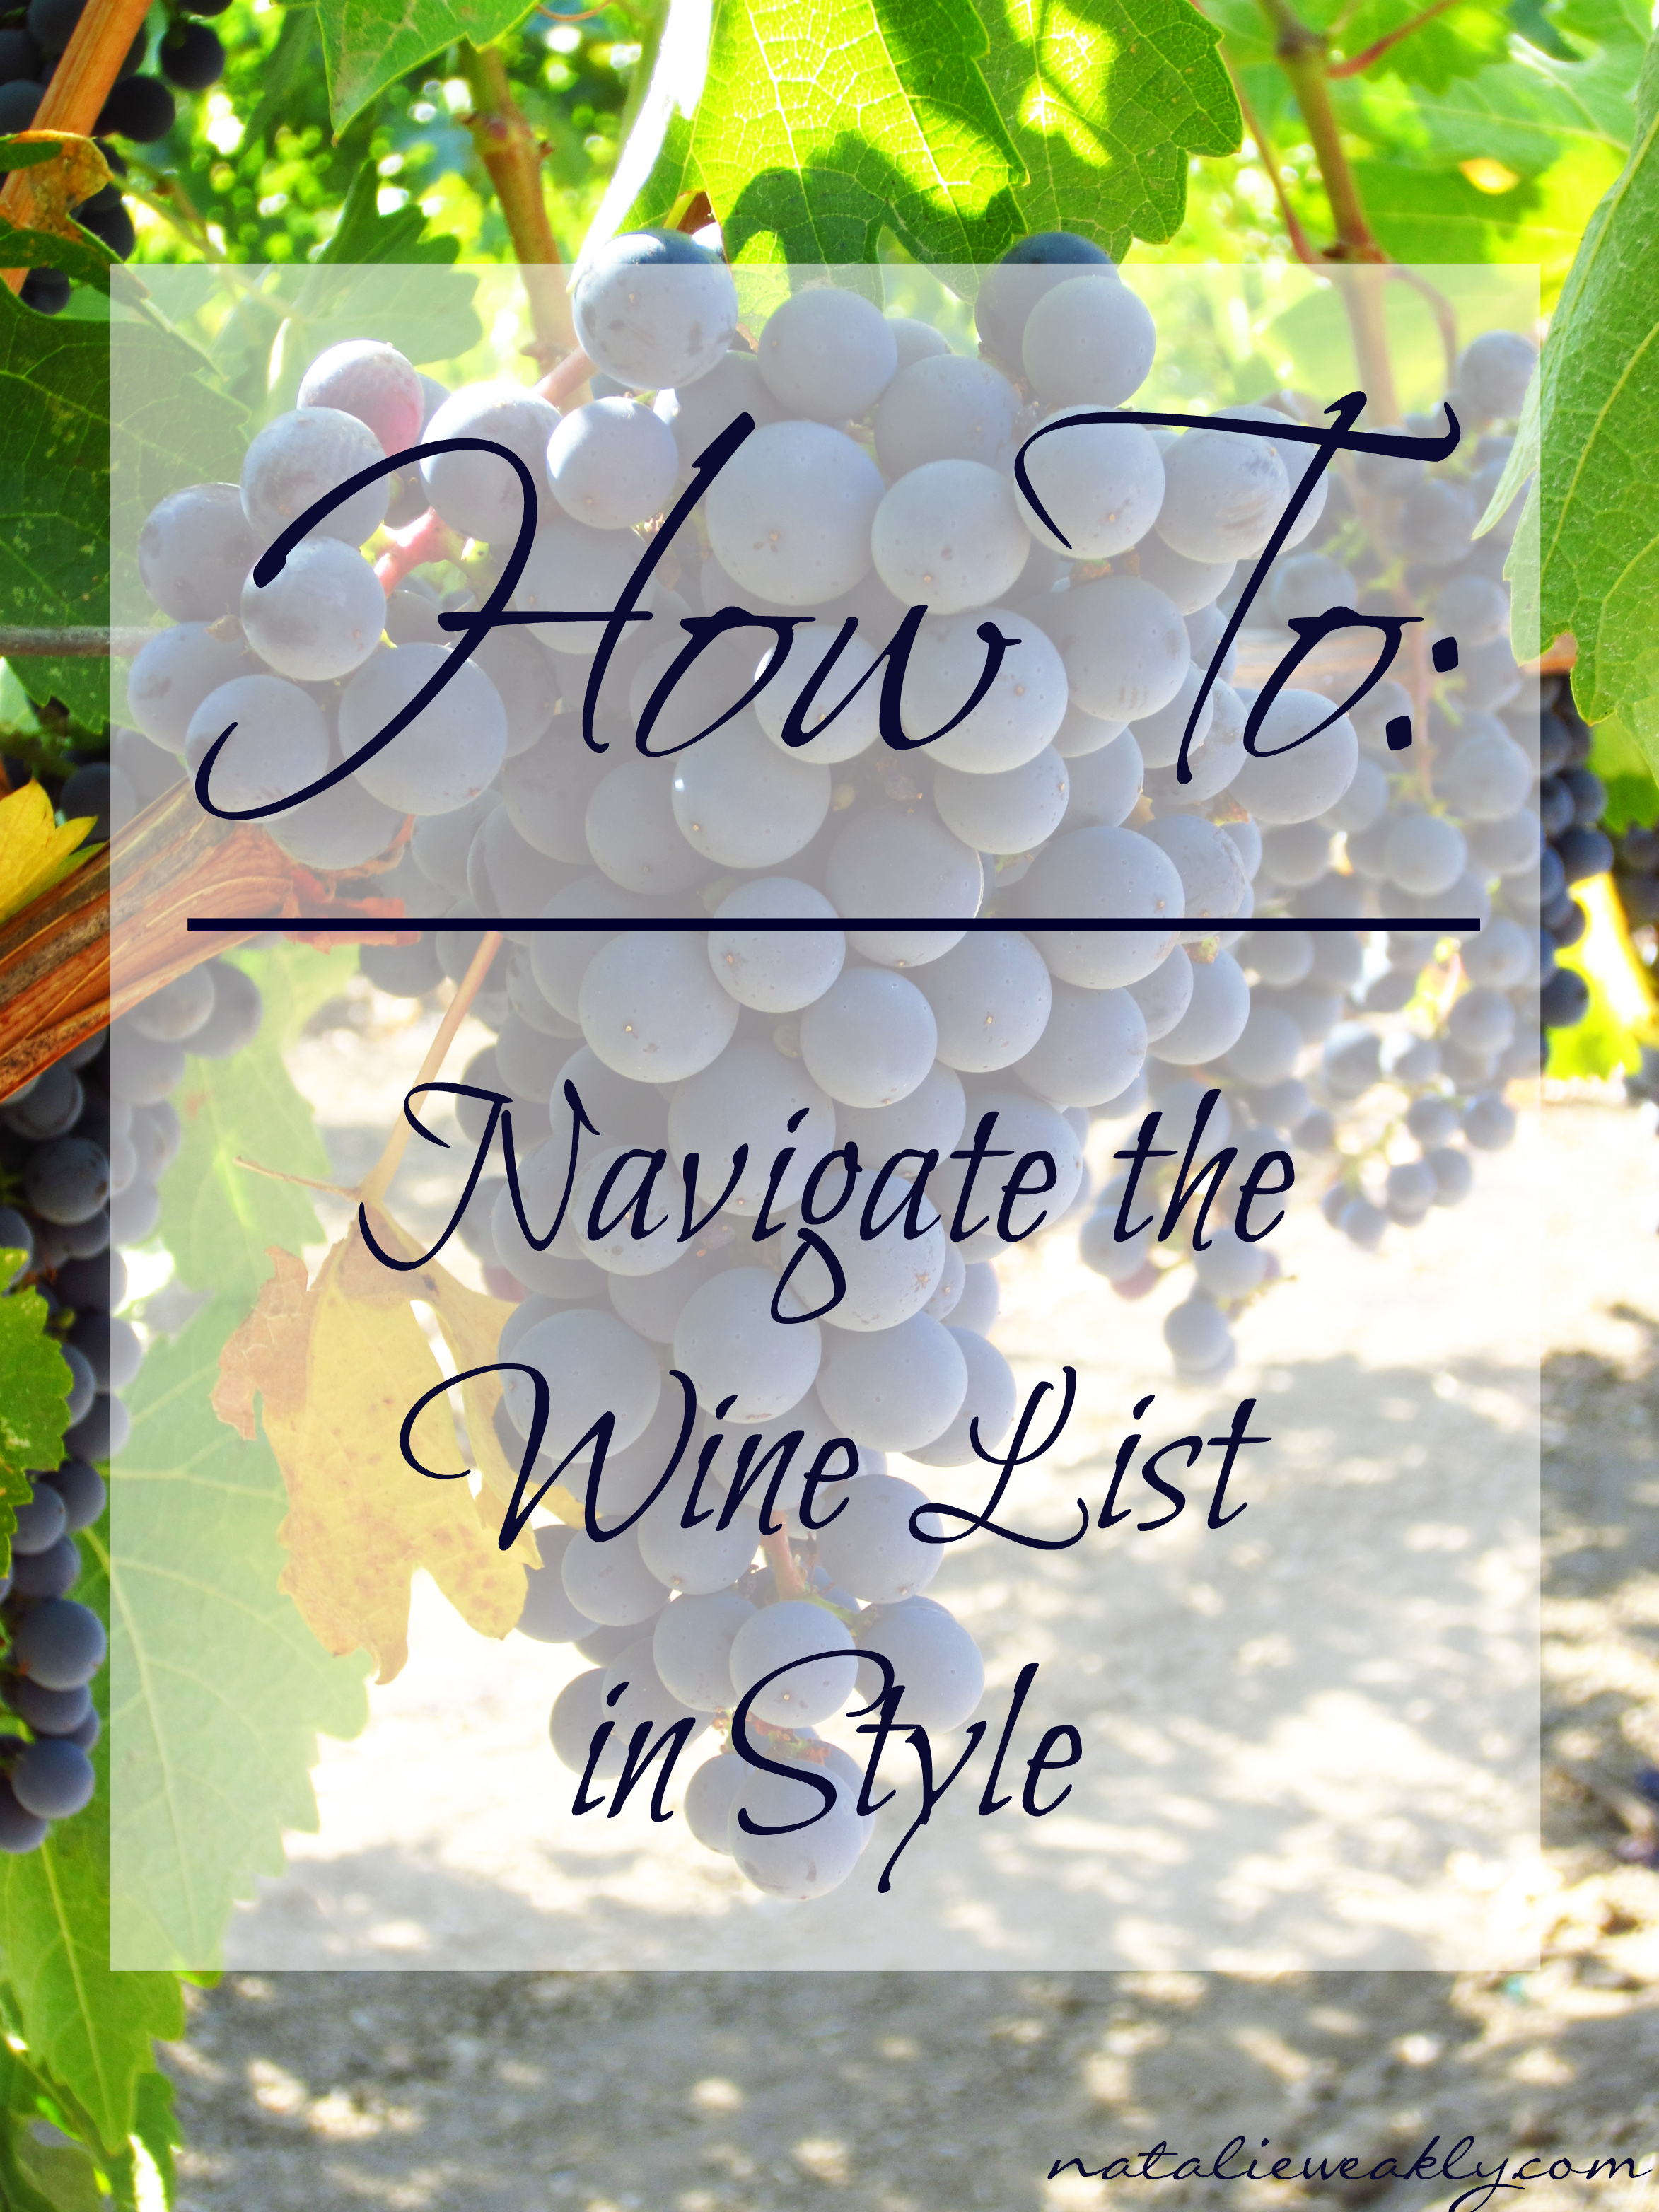 Natalie Weakly Image Consultant Houston Signature Style How to Navigate the Wine List in Style Intro Pic